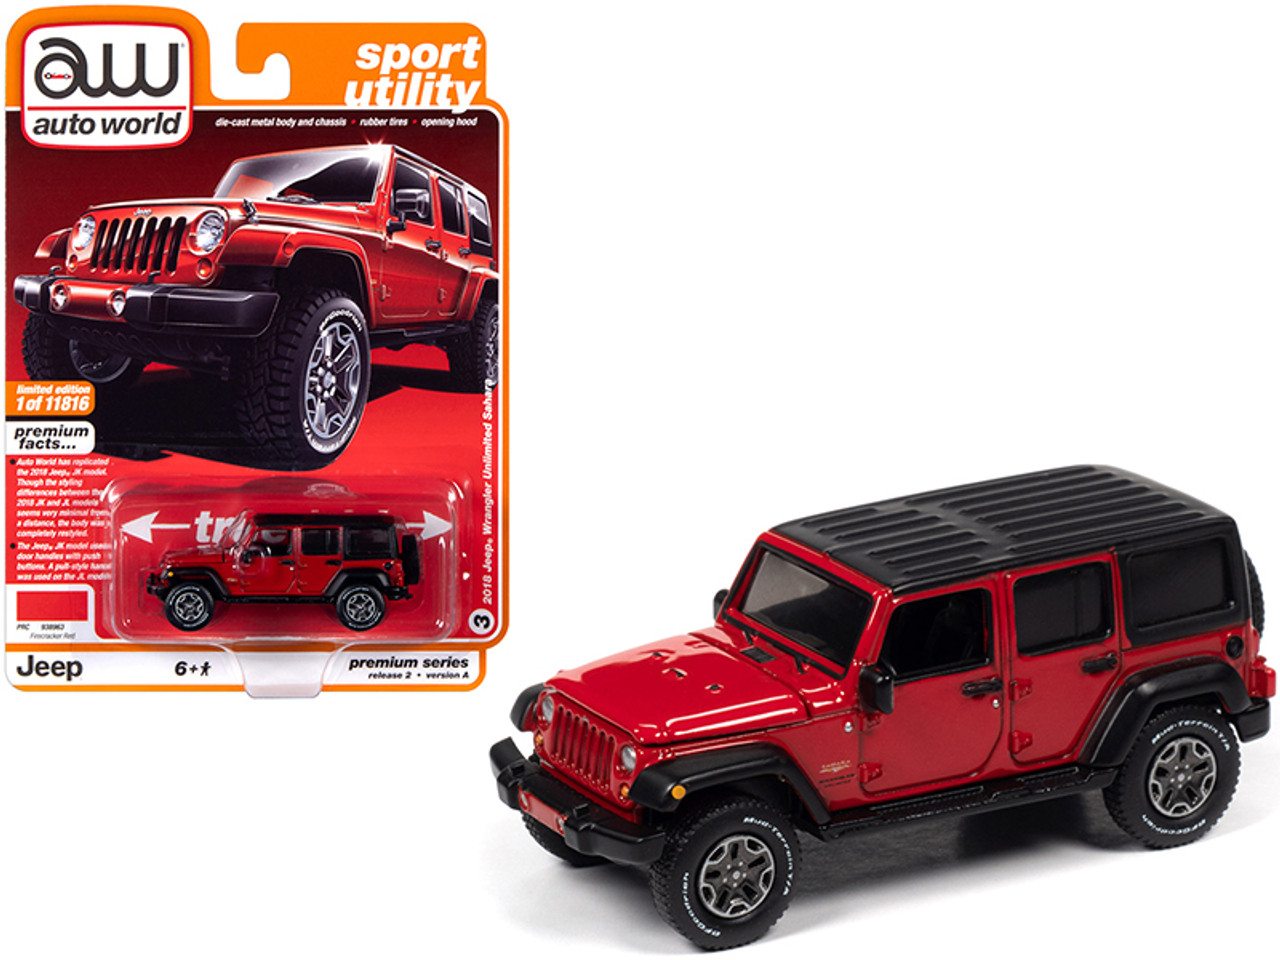 2018 Jeep Wrangler Unlimited Sahara (4-door) Firecracker Red with Black Top "Sport Utility" Limited Edition to 11,816 pieces Worldwide 1/64 Diecast Model Car by Autoworld